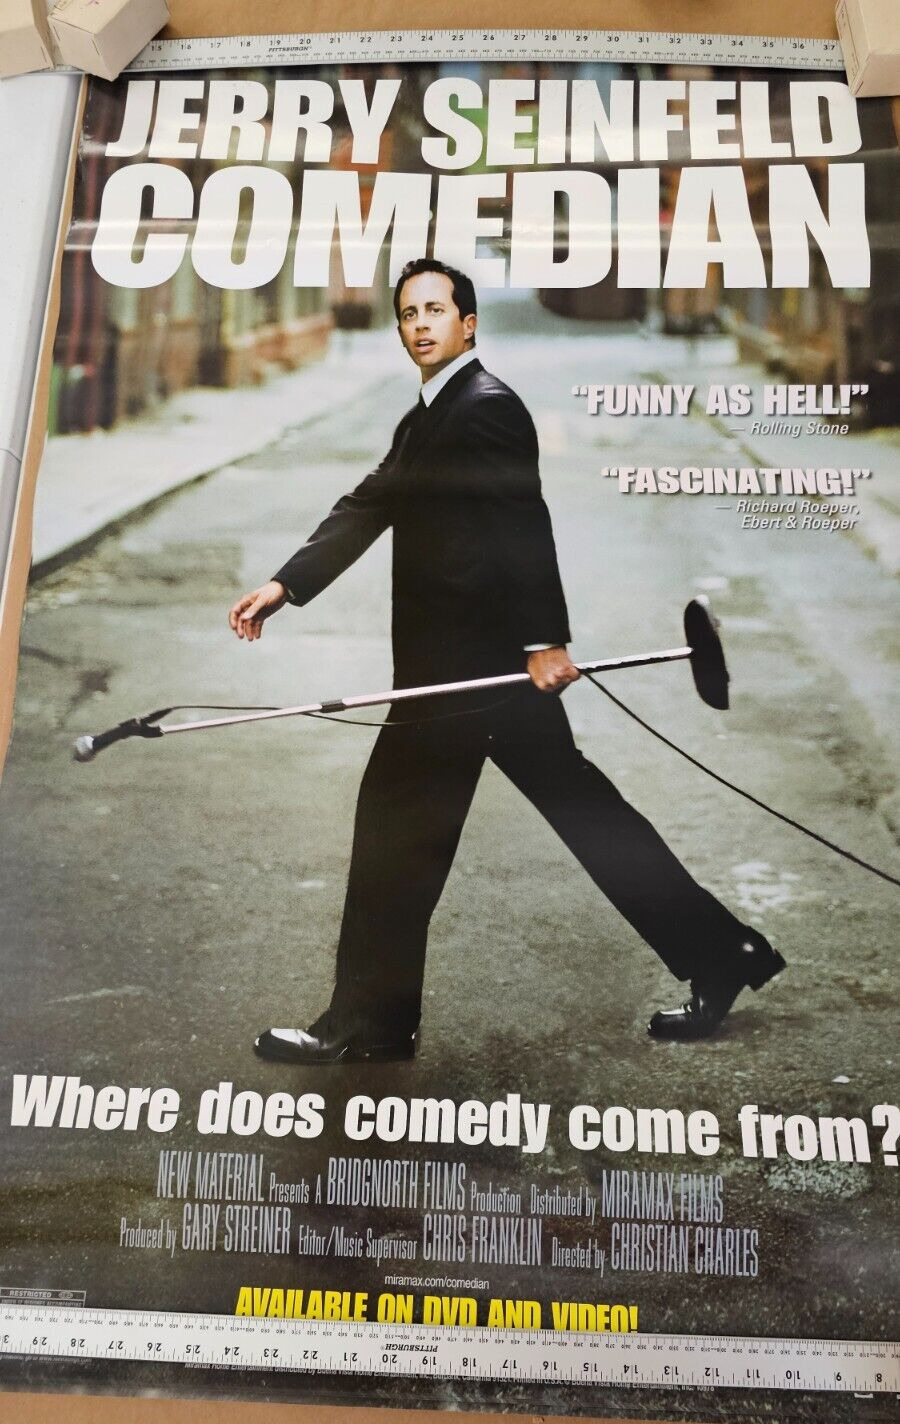 Jerry Seinfeld Comedian  DVD promotional Movie poster